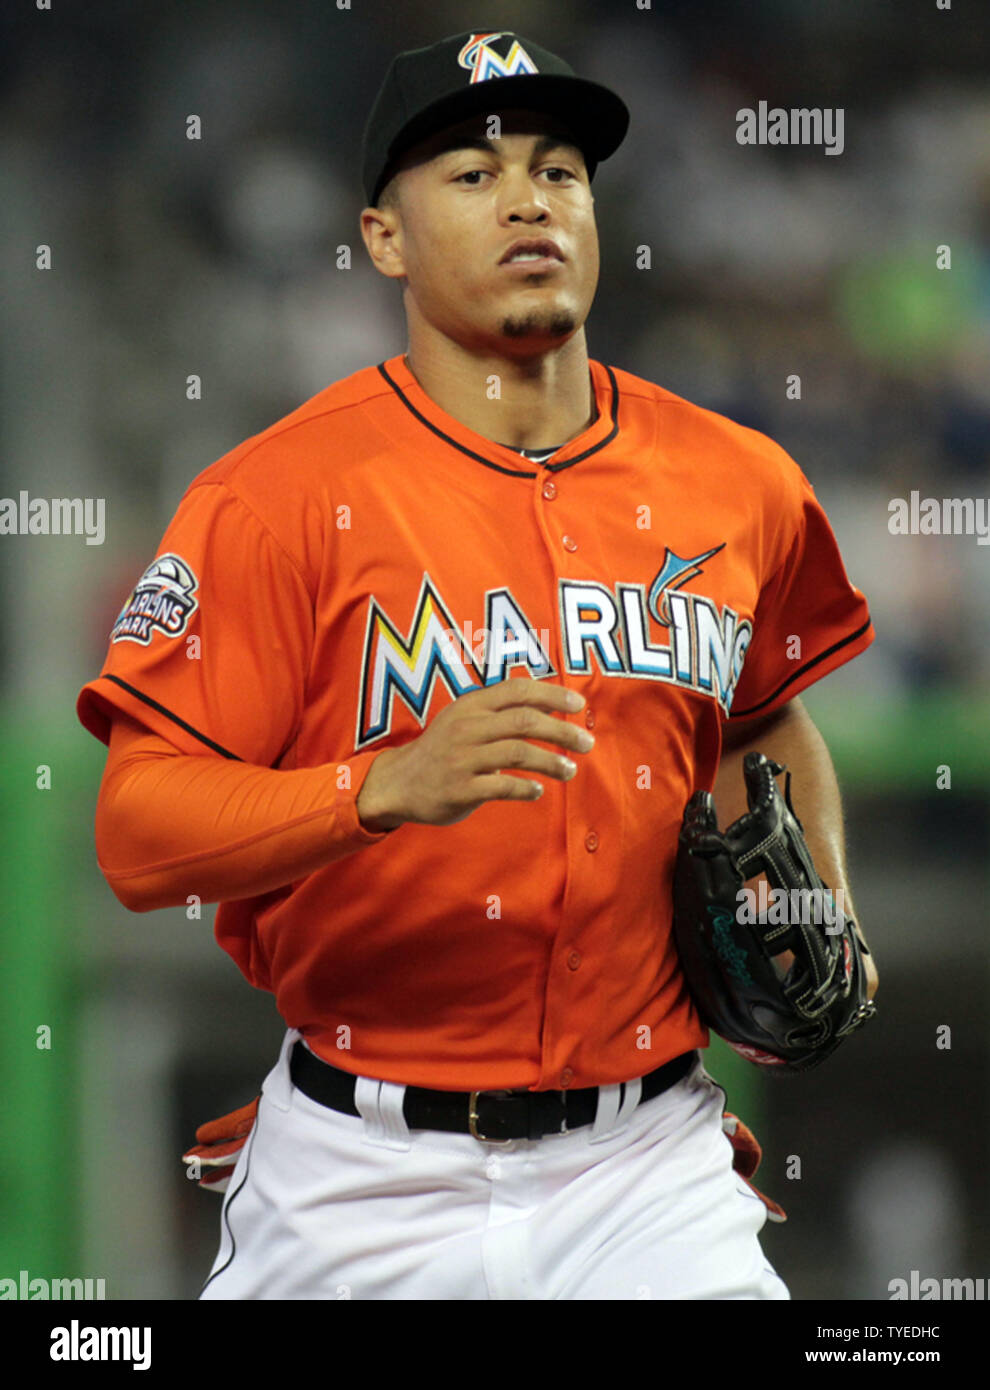 Miami Marlins center fielder Giancarlo Stanton returns to the dugout after  the second inning against the New York Yankees in their first exhibition  game at the new Marlins Ball Park April 1